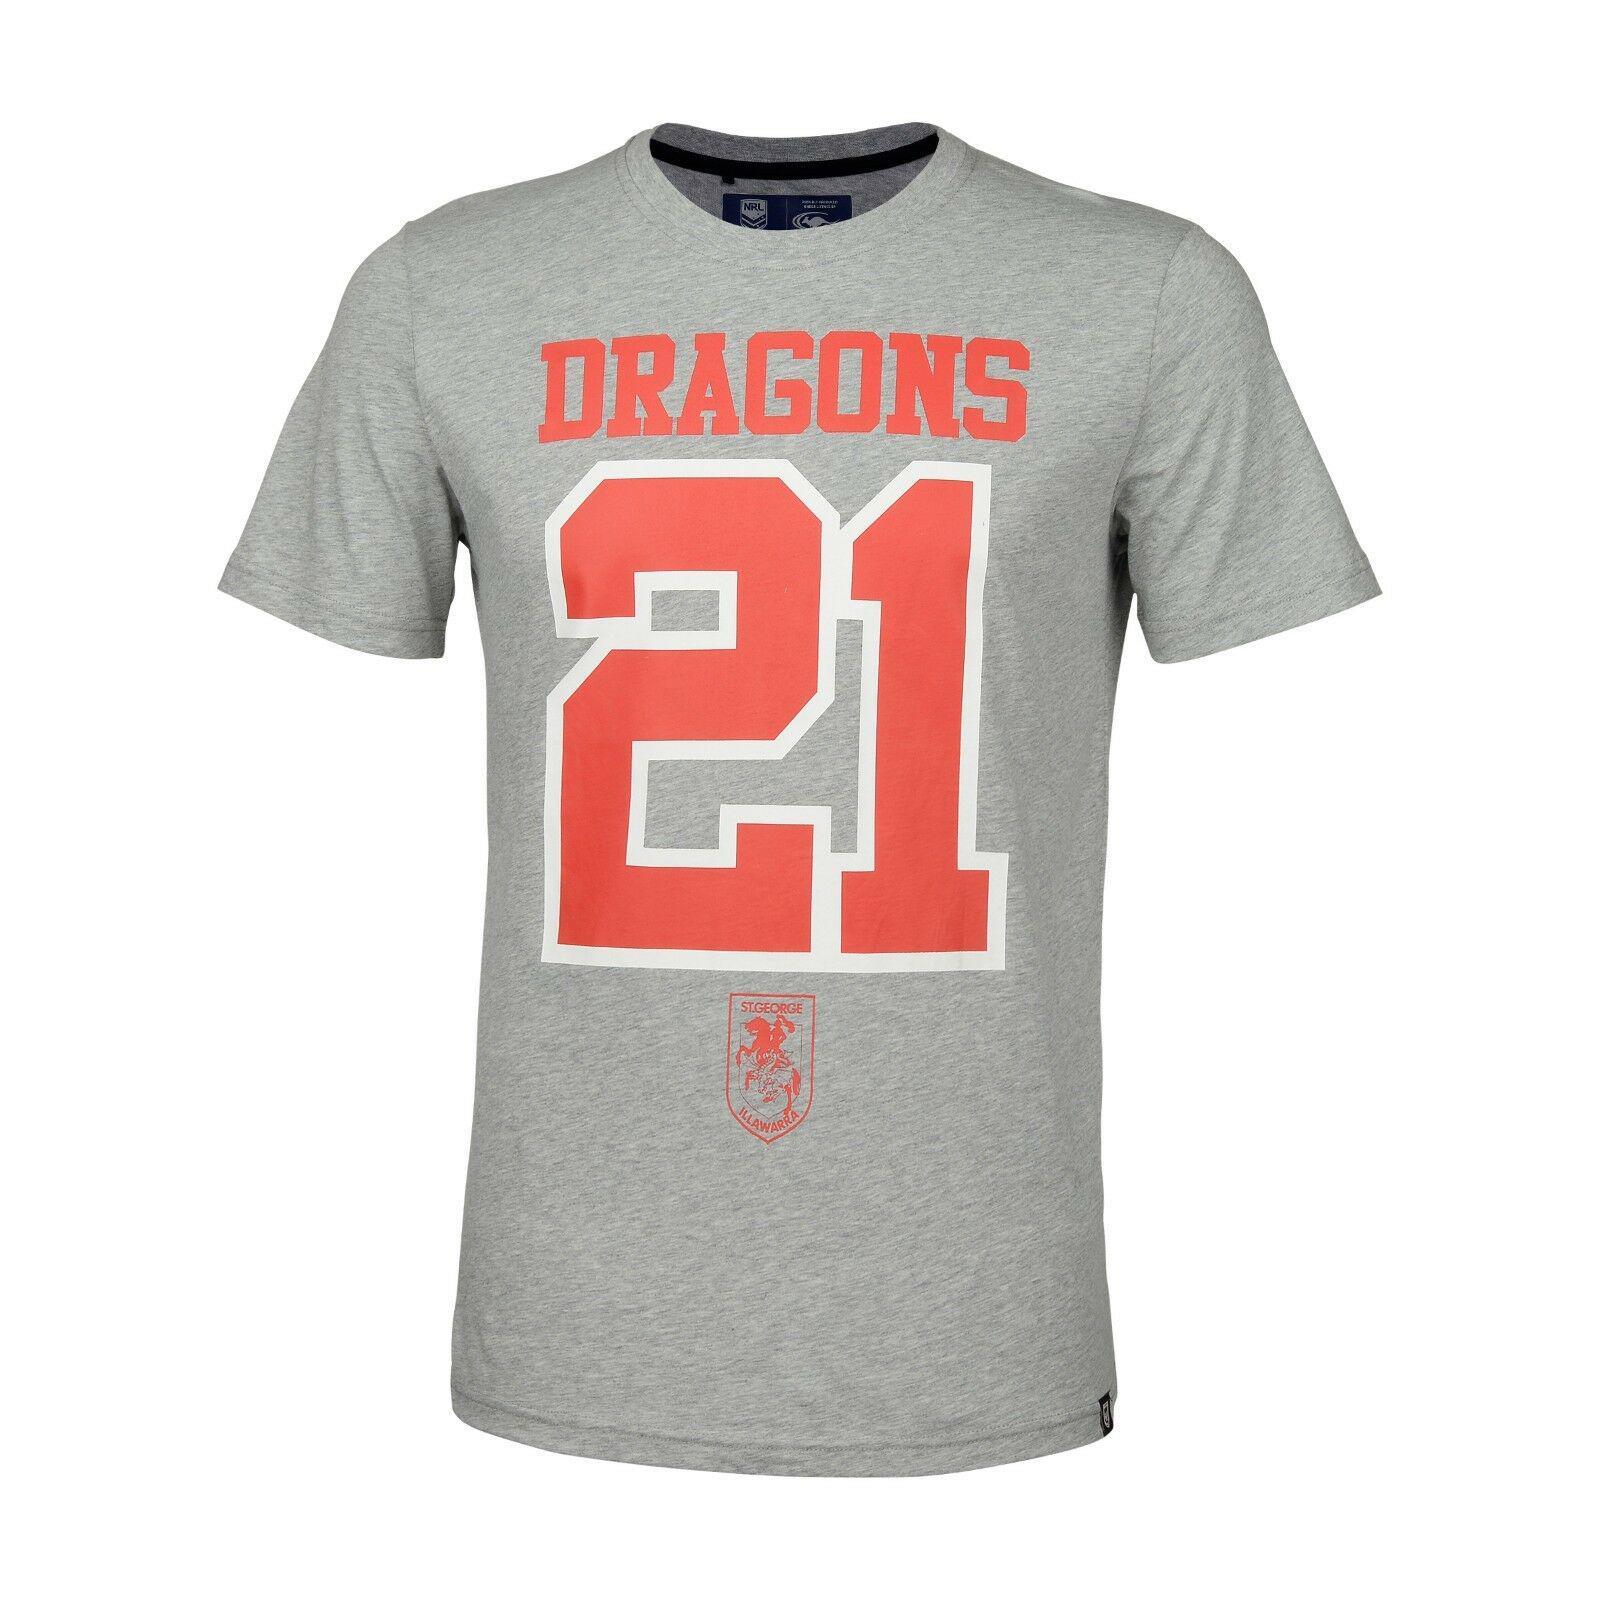 St George ILL Dragons NRL 2019 Classic Cotton Lifestyle T Shirt Sizes S-5XL! S19